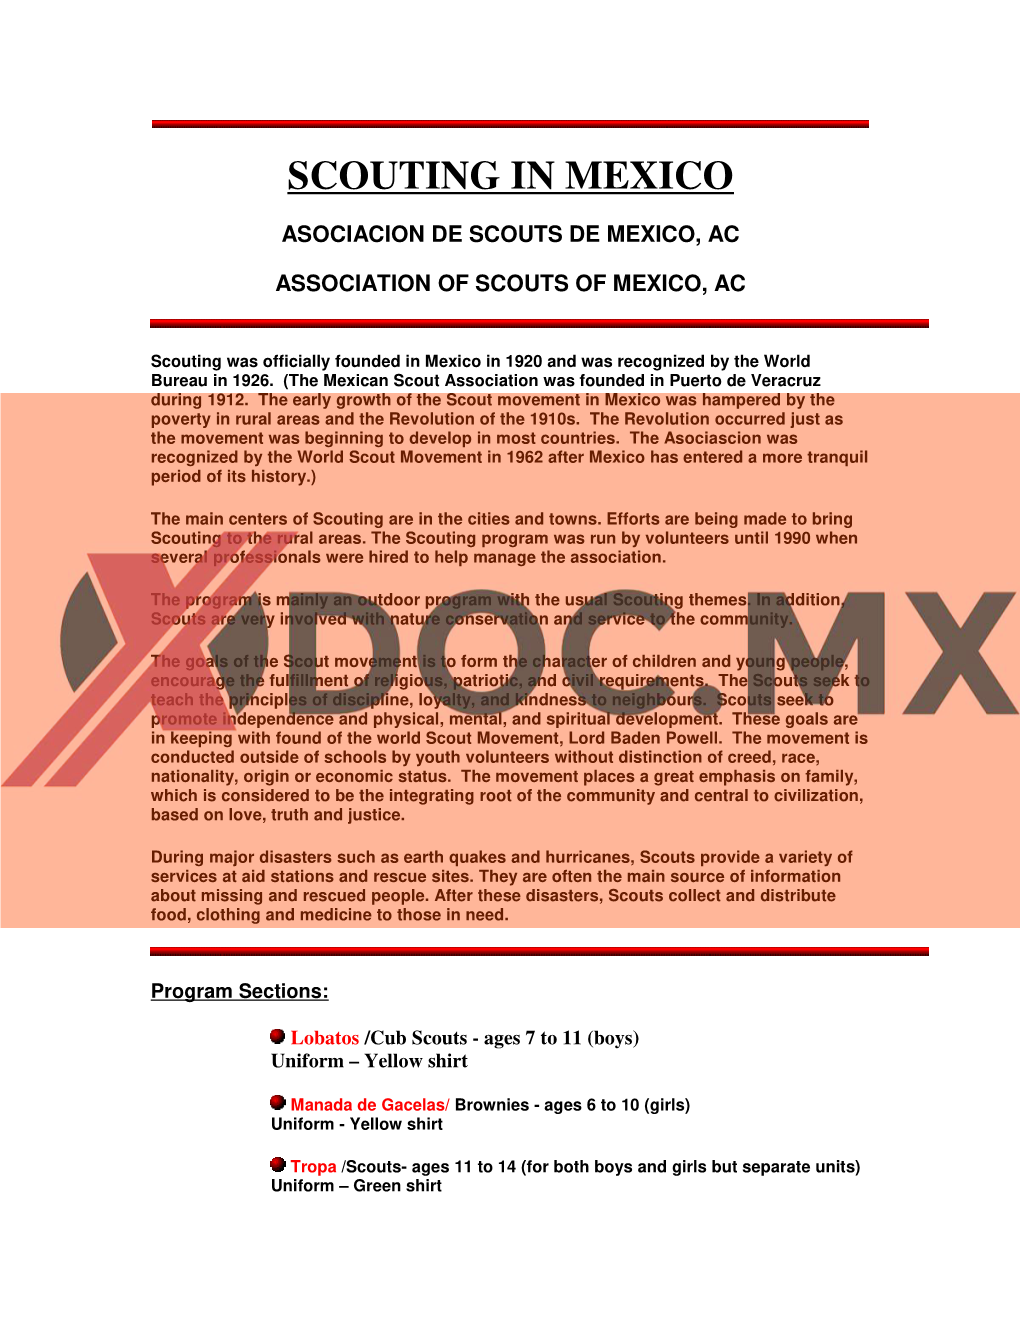 Scouting in Mexico